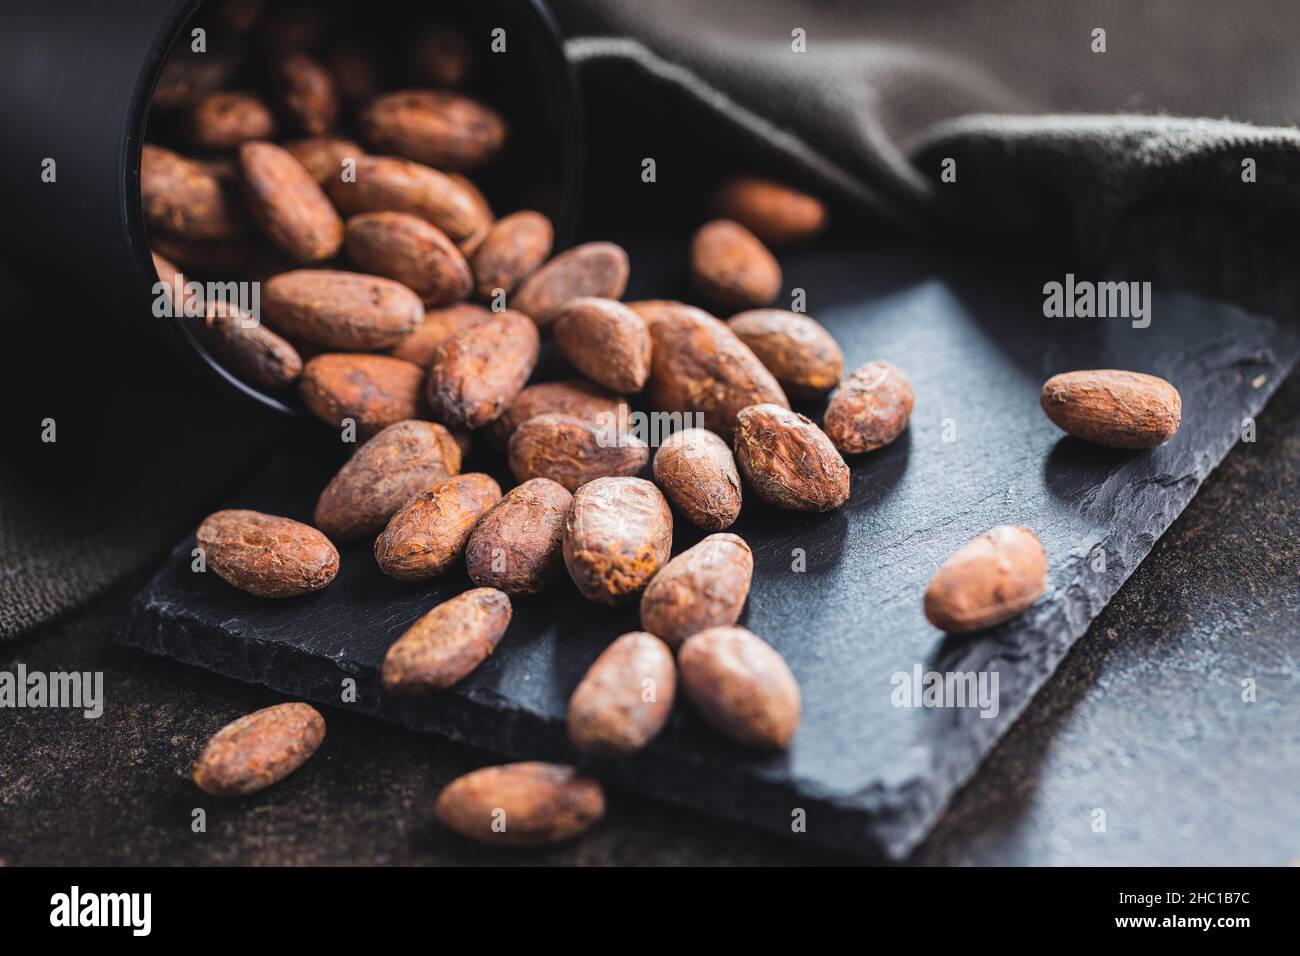 Dried cocoa beans. Cacao beans on kitchen table. Stock Photo